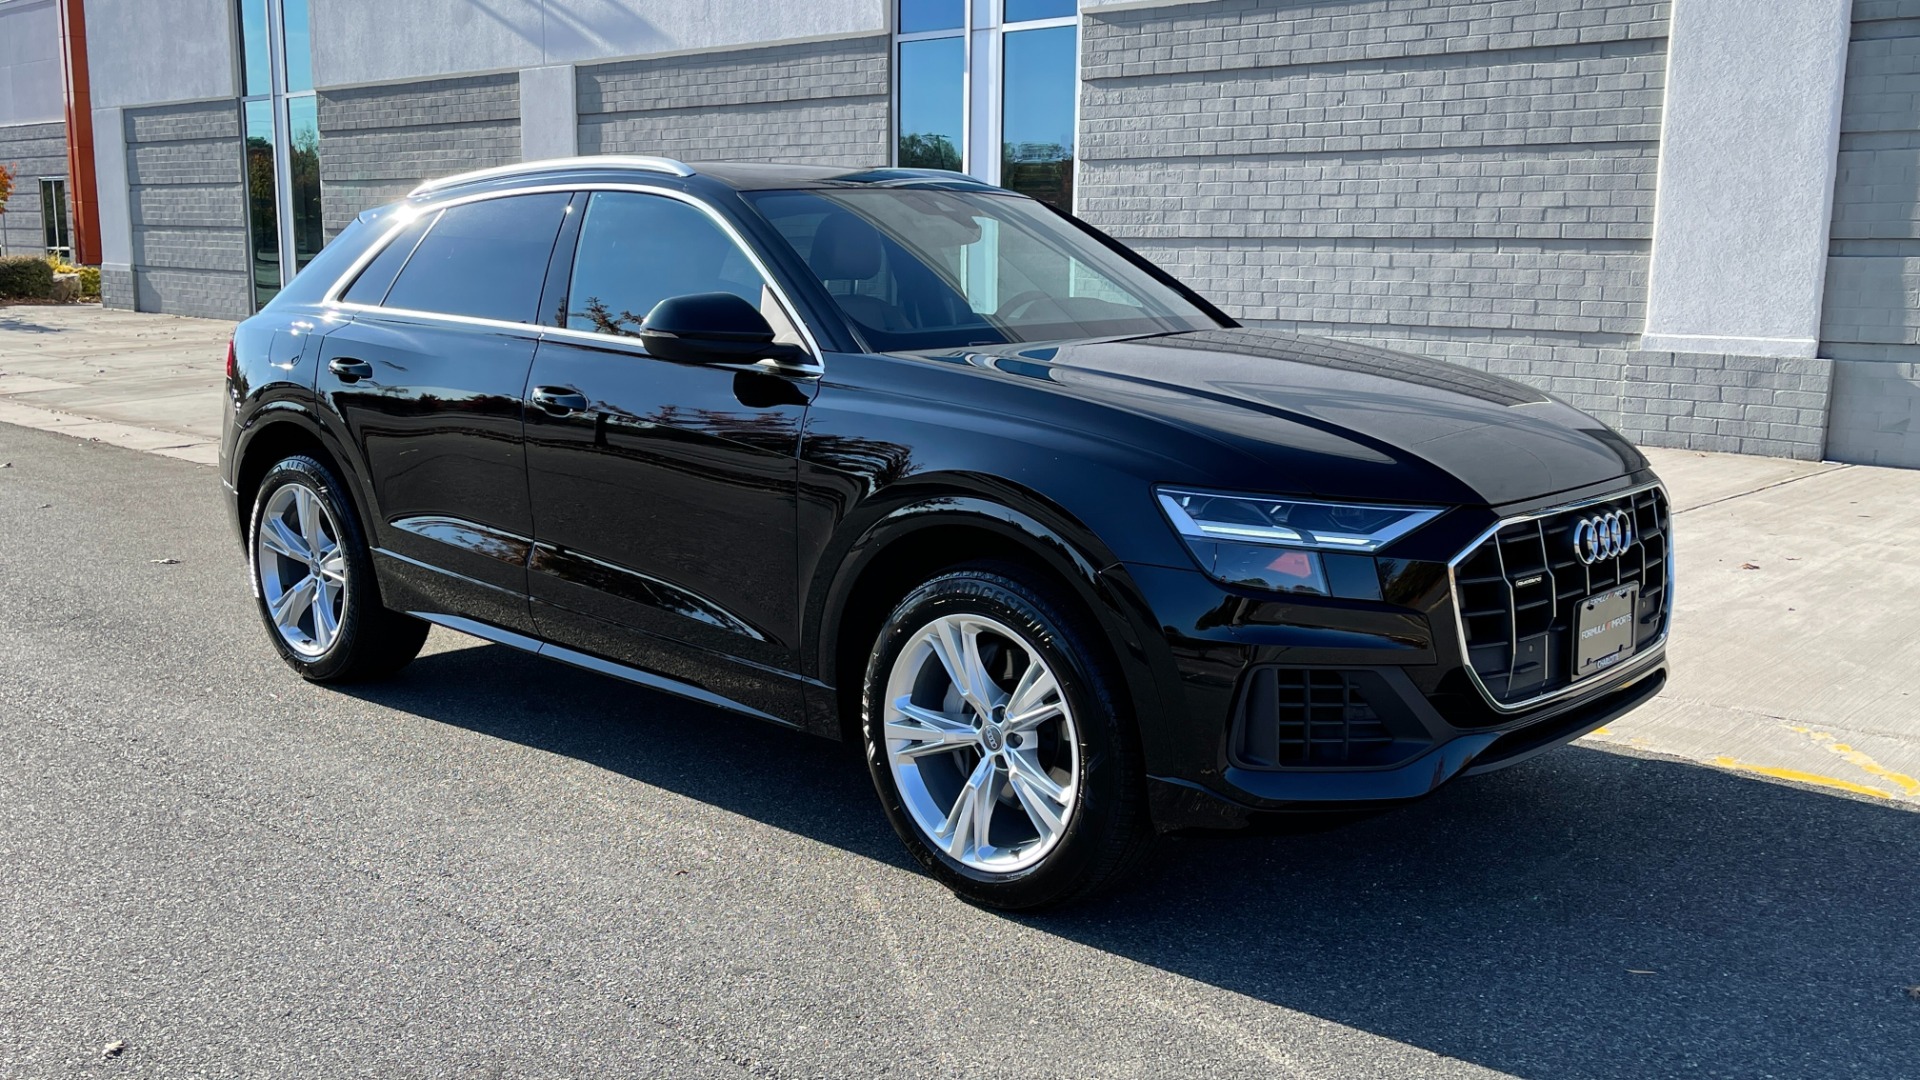 Used 2019 Audi Q8 PREMIUM / QUATTRO / CONVENIENCE PACKAGE / COLD WEATHER / 21IN WHEELS for sale $46,995 at Formula Imports in Charlotte NC 28227 7